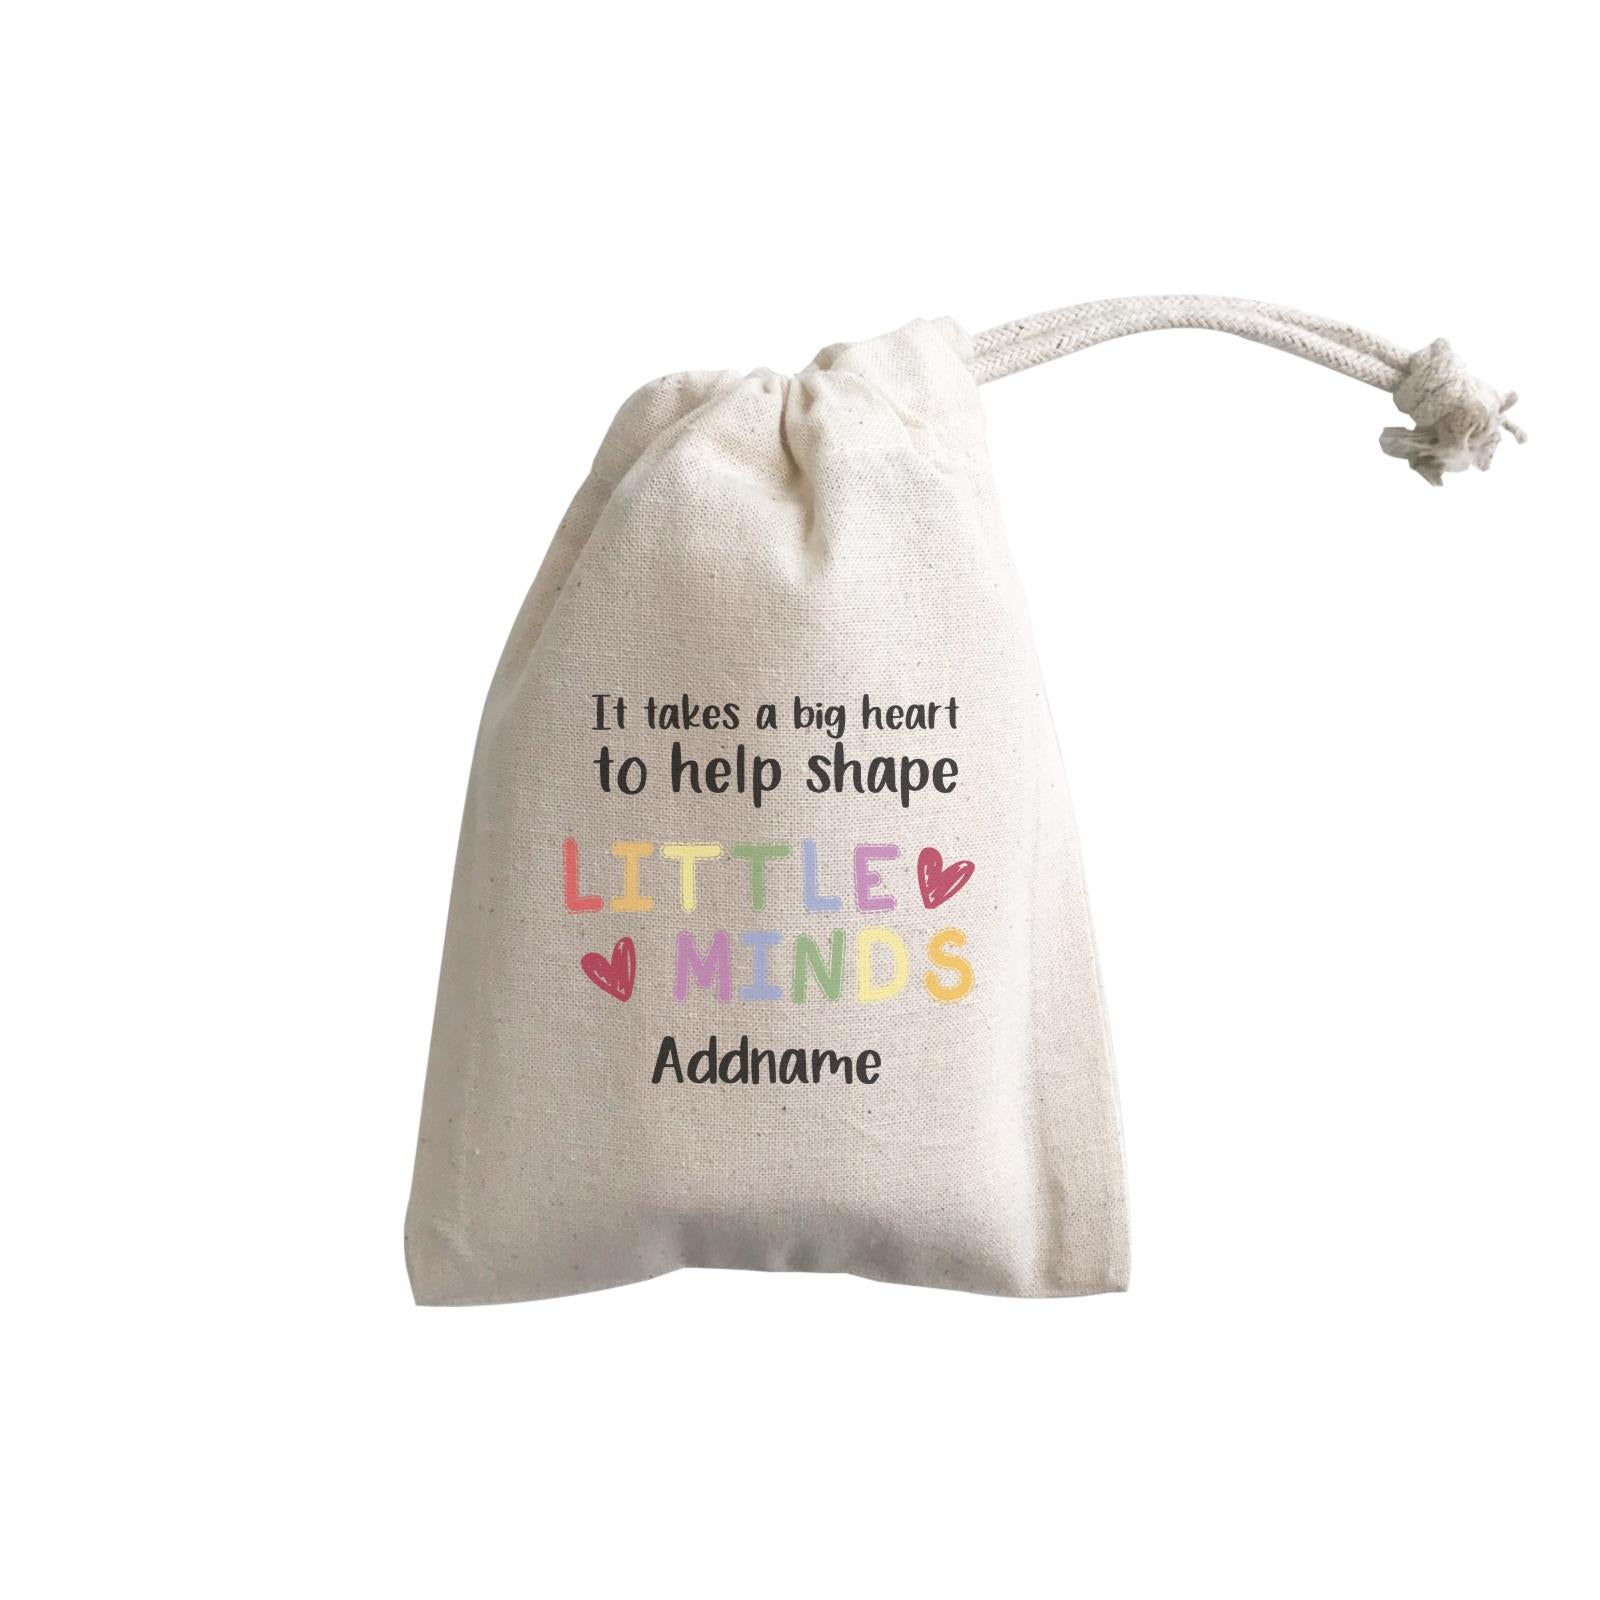 Teacher Quotes 2 It Takes A Big Heart To Help Shape Little Minds Addname GP Gift Pouch